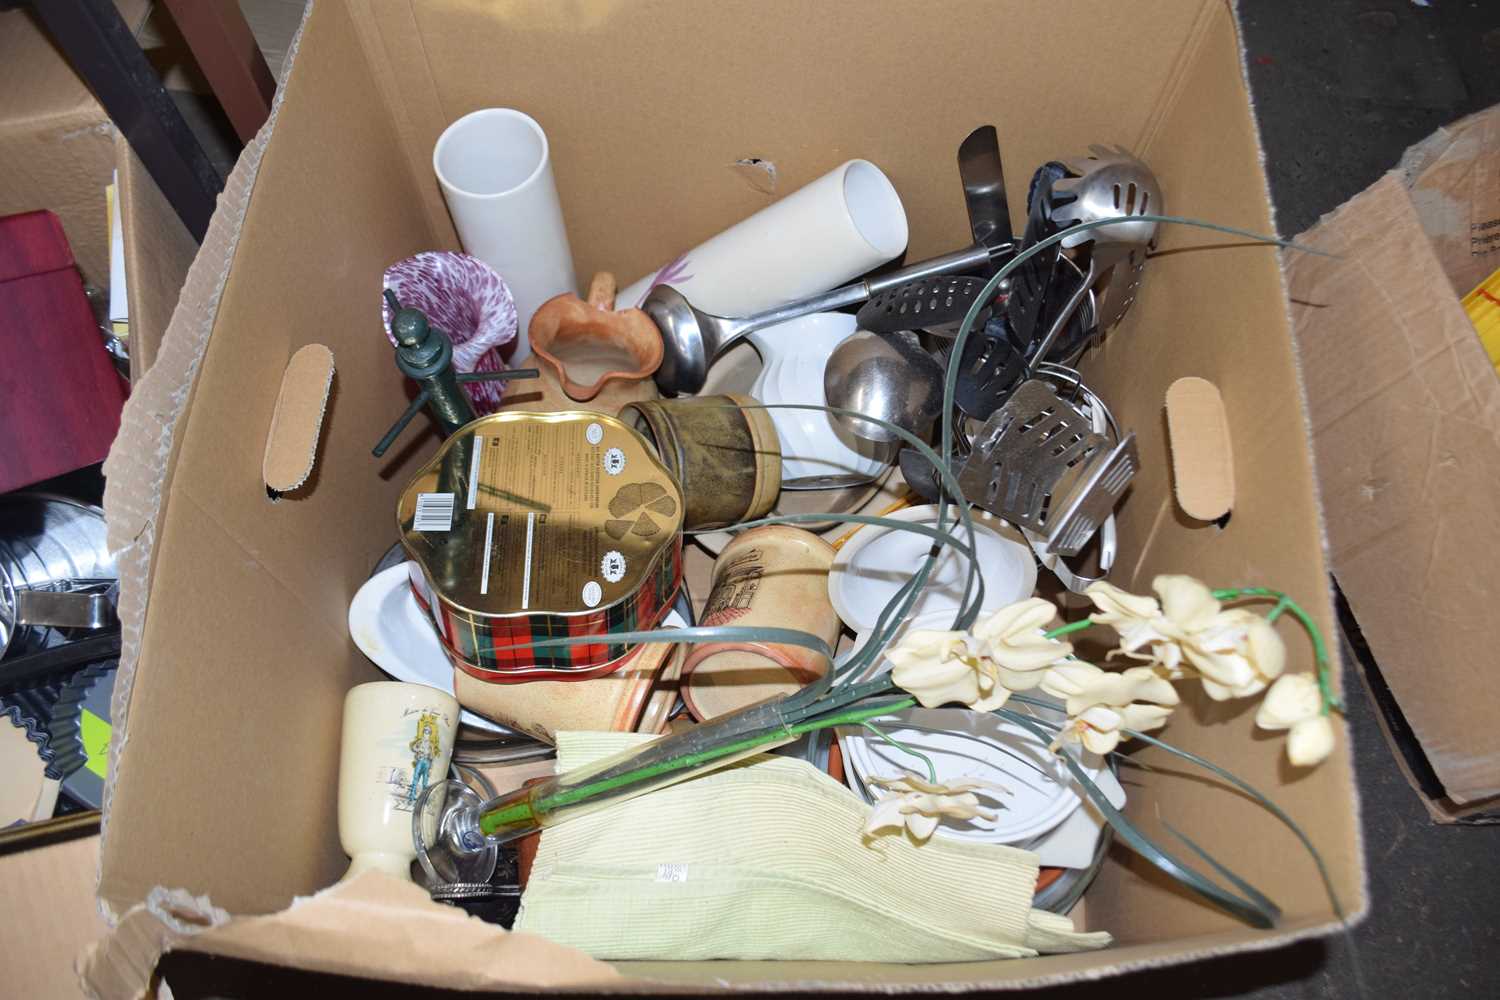 Large box of various assorted kitchen wares